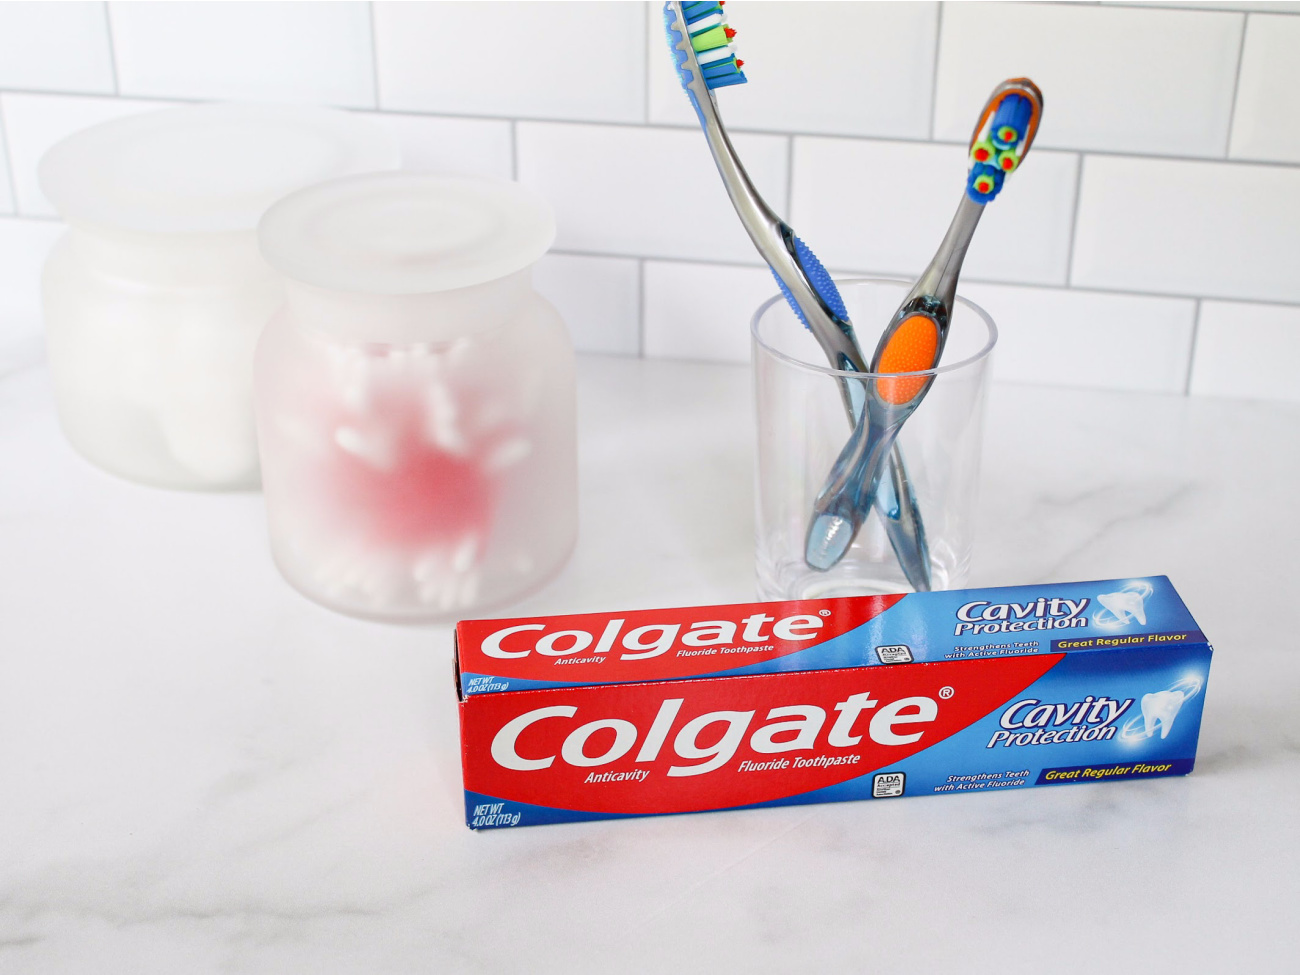 Colgate Toothpaste Only 50¢ At Publix on I Heart Publix 9